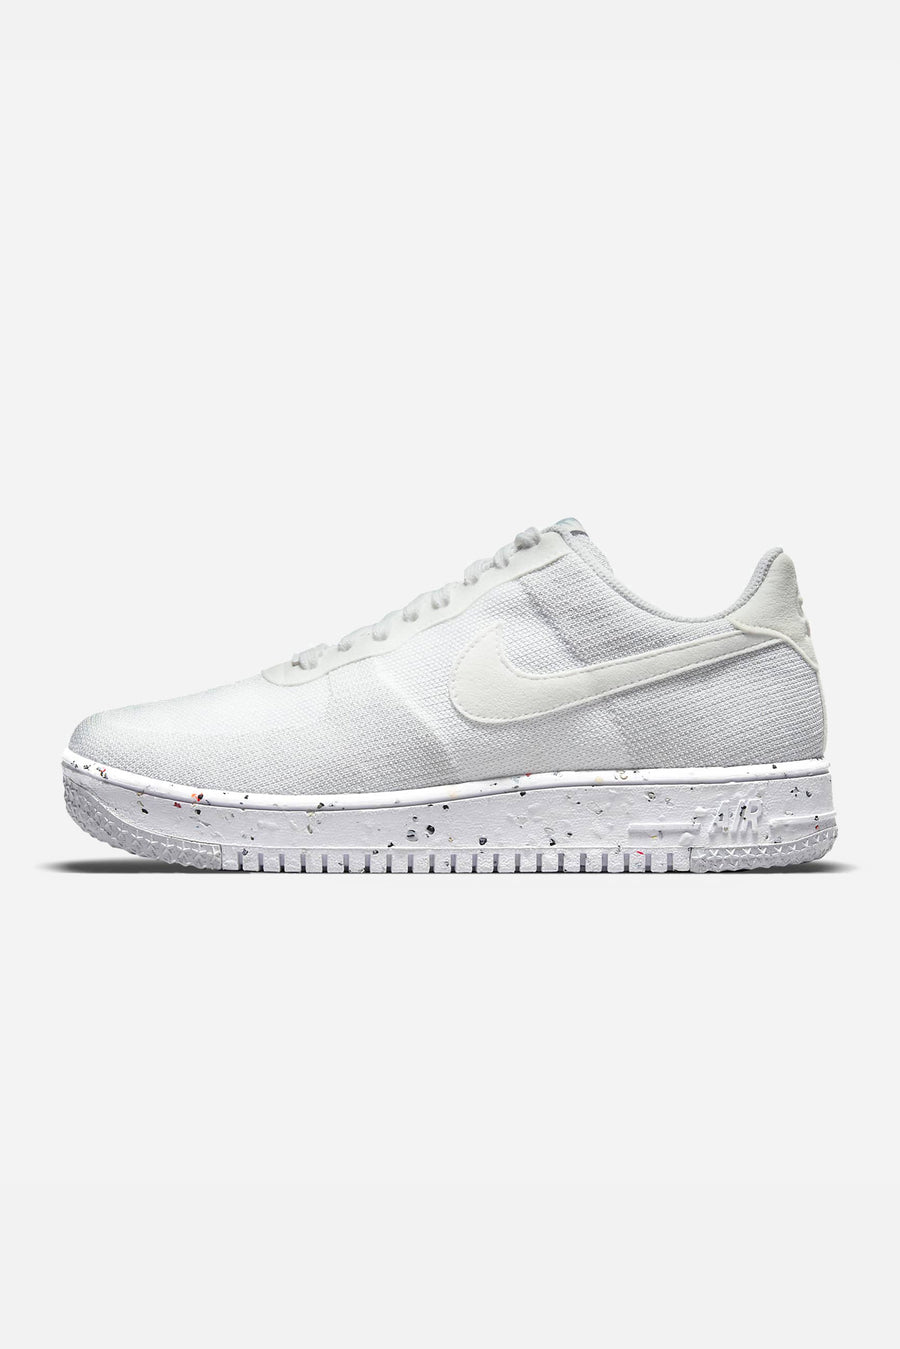 Nike Air Force 1 Crater Flyknit White - blueandcream